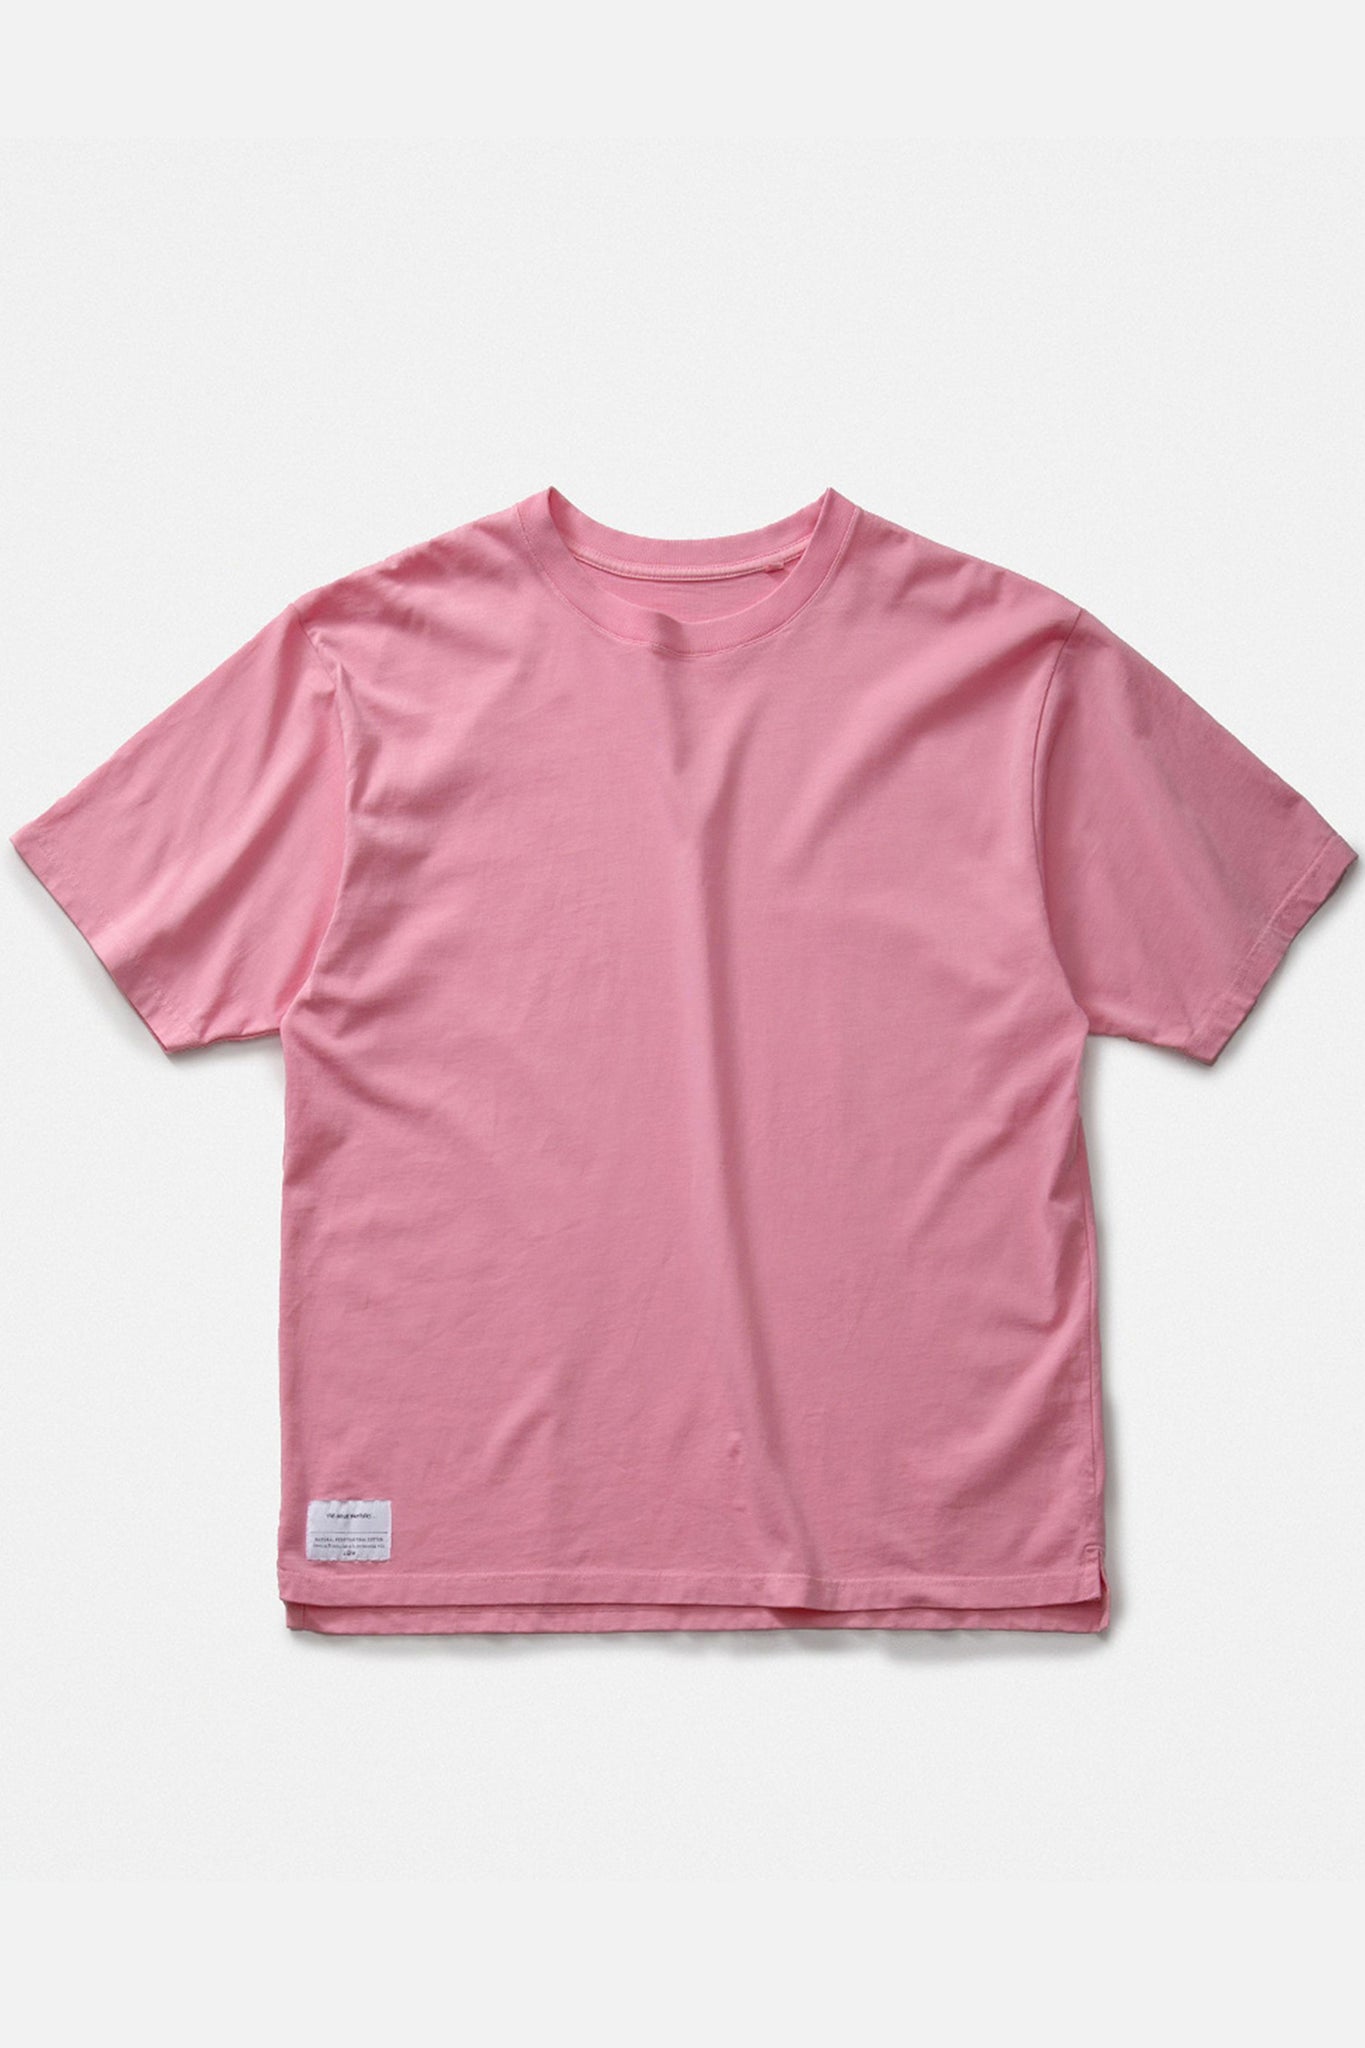 THE INOUE BROTHERS... "SINGLE JERSEY BOX T-SHIRT/PINK"